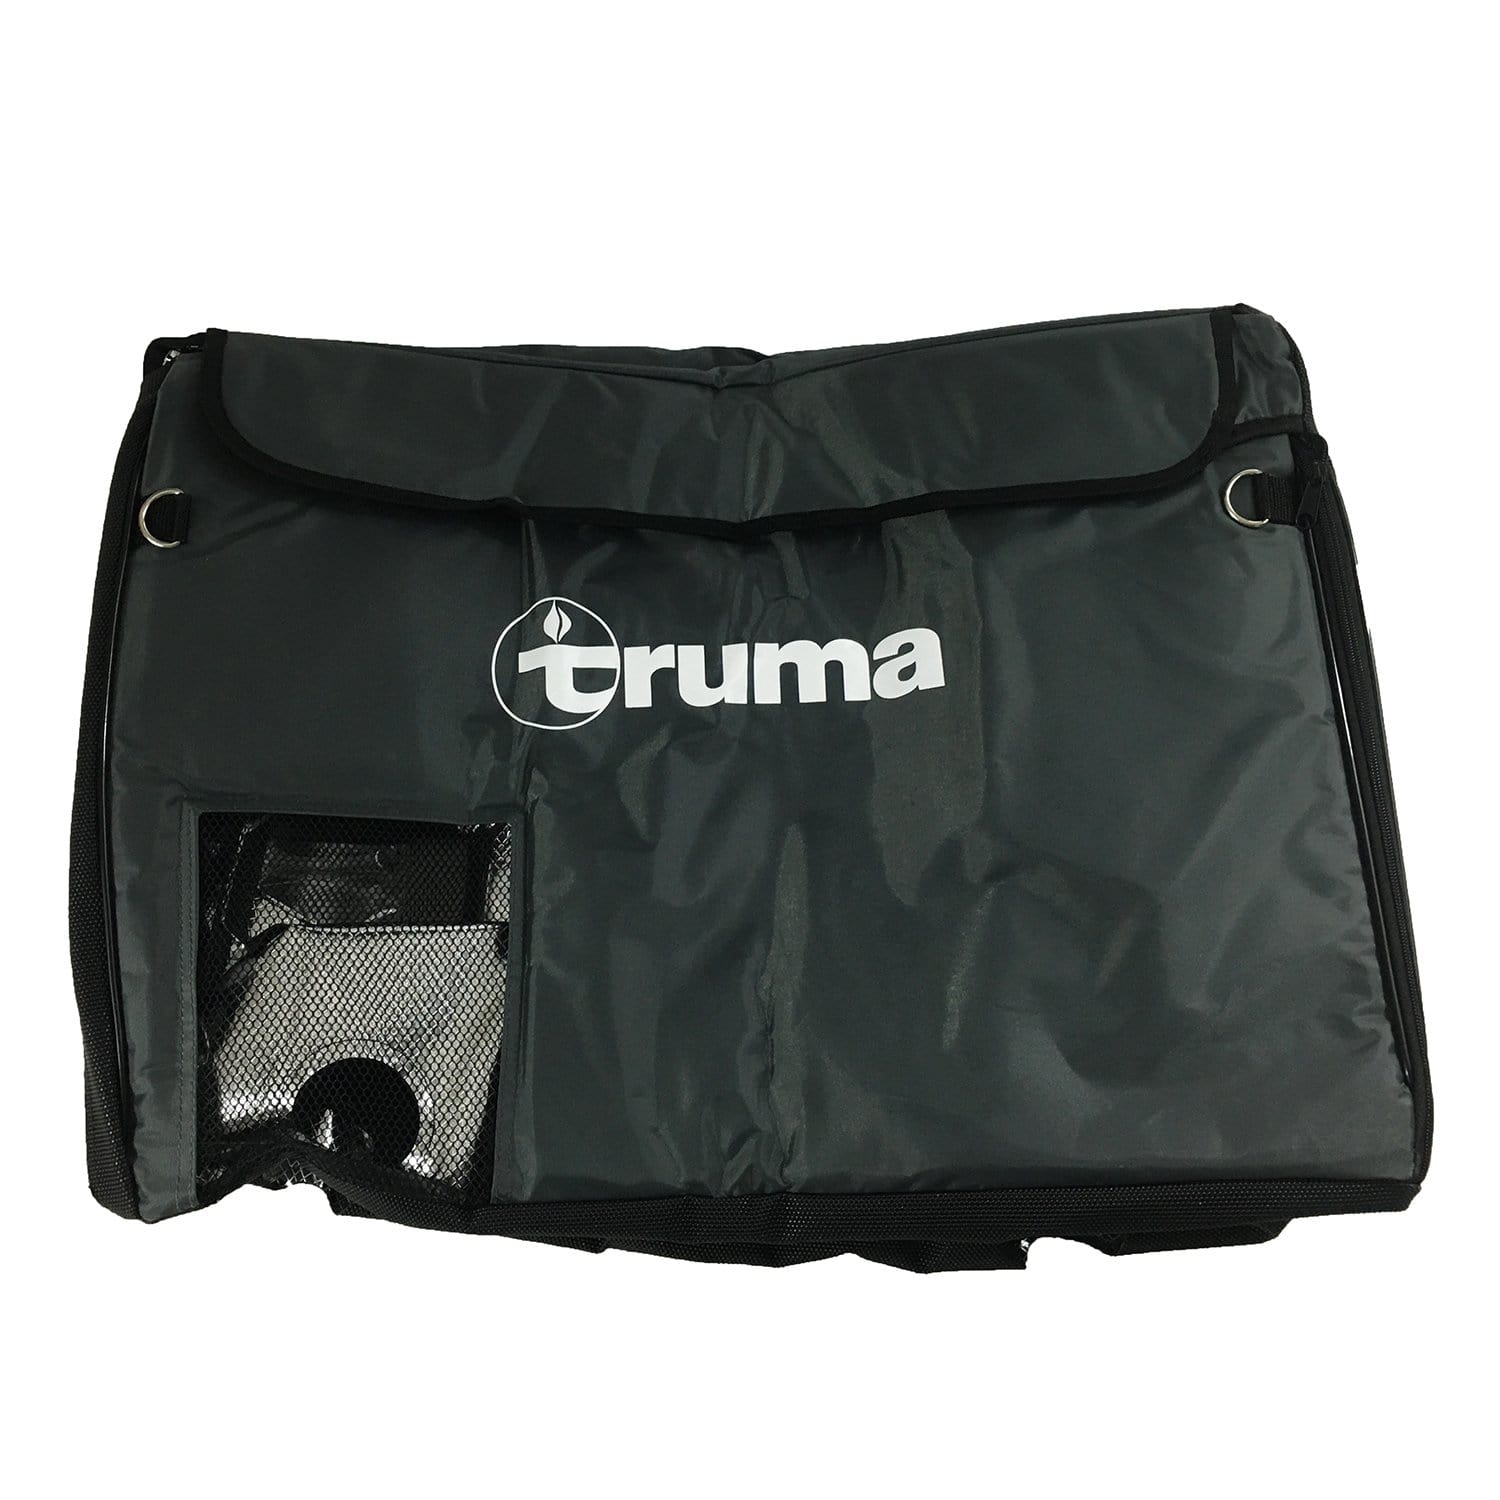 Truma 40955-02 Insulated Cooler Cover for C36